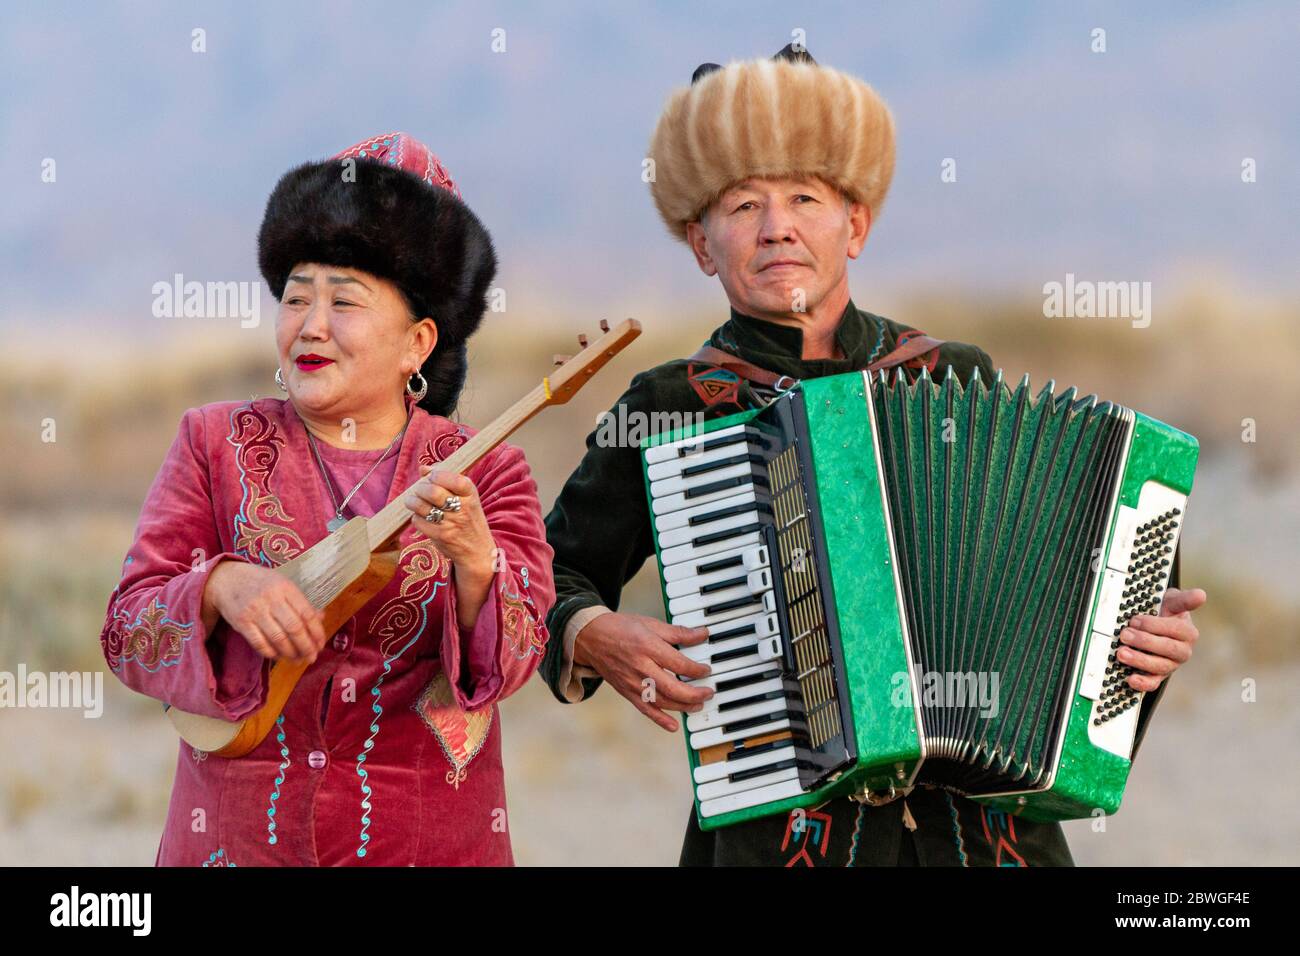 Kyrgyz musicians playing musical instruments. Man plays accordion and woman plays traditional instrument known as Komuz, in Issyik Kul, Kyrgyzstan Stock Photo